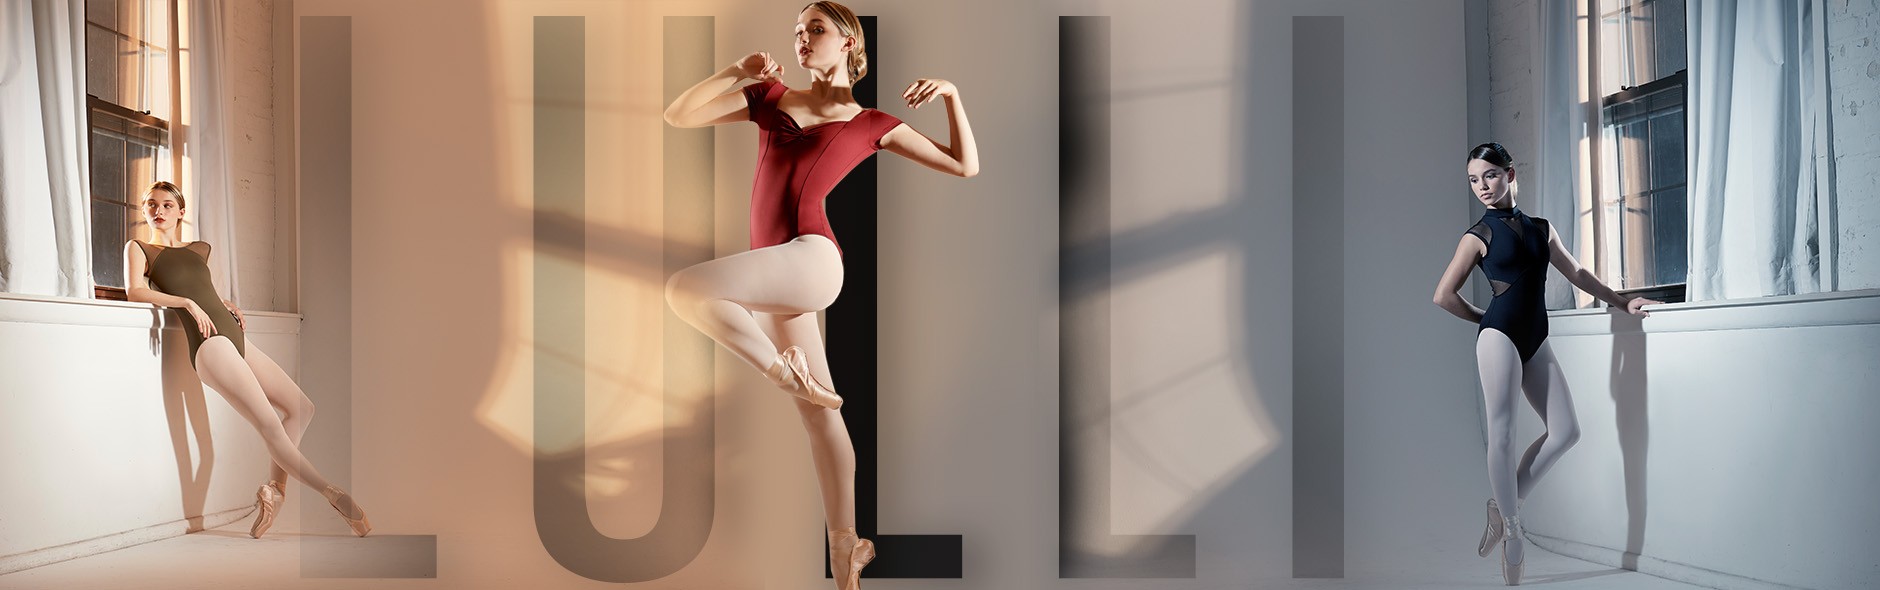 New in! Dance Leotards from LULLI!